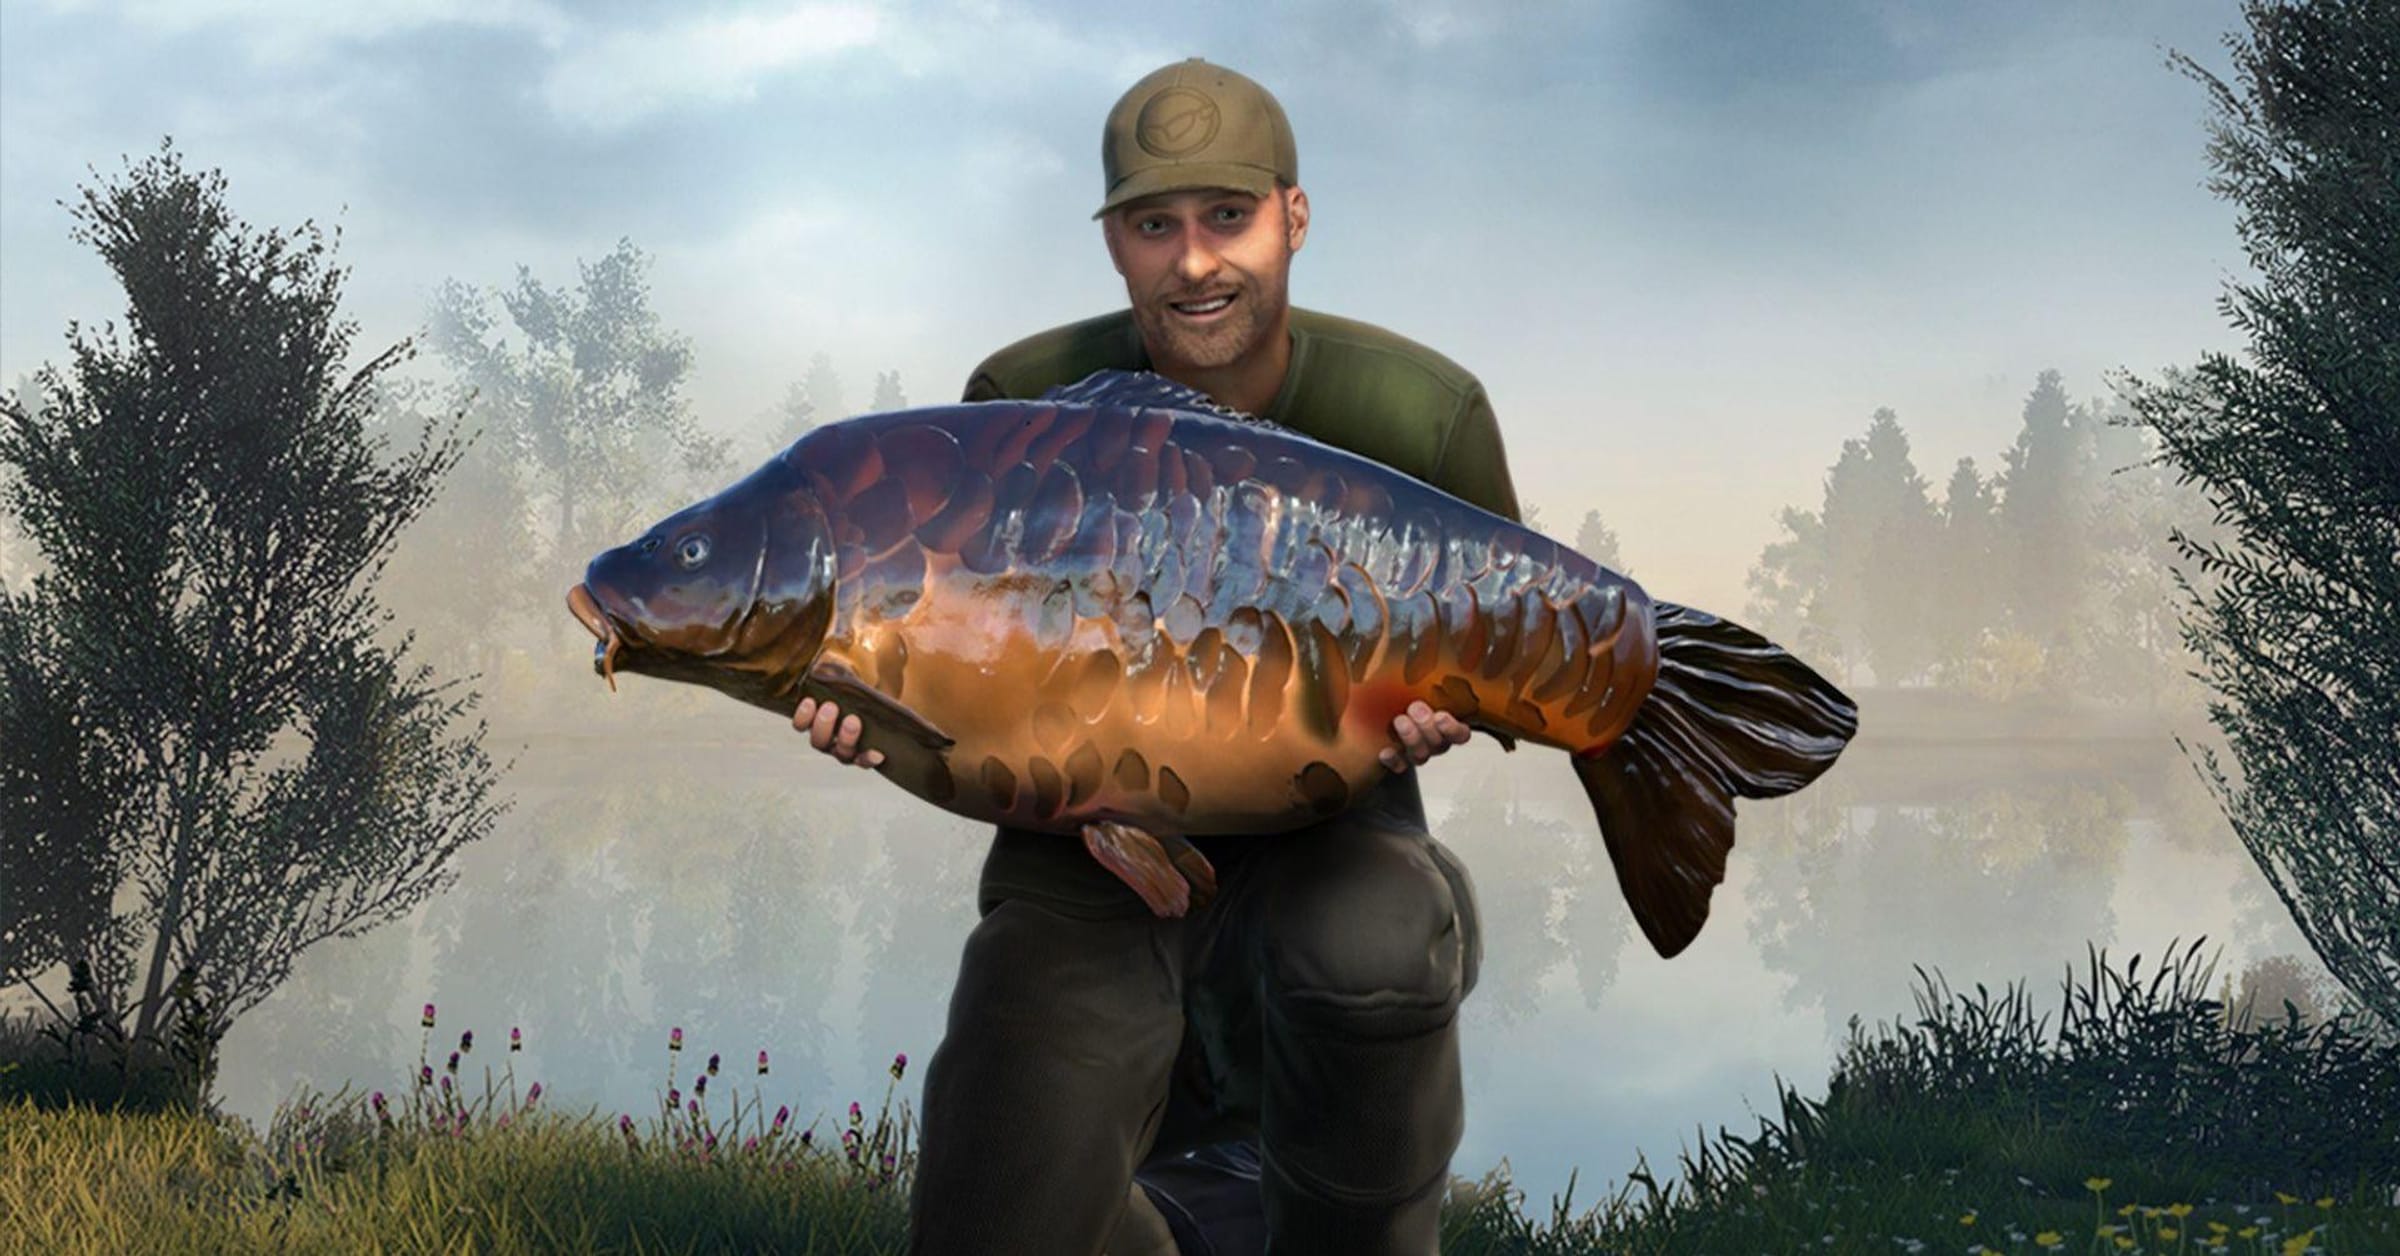 Ultimate Fishing Simulator Launches On Xbox One With PS4 And